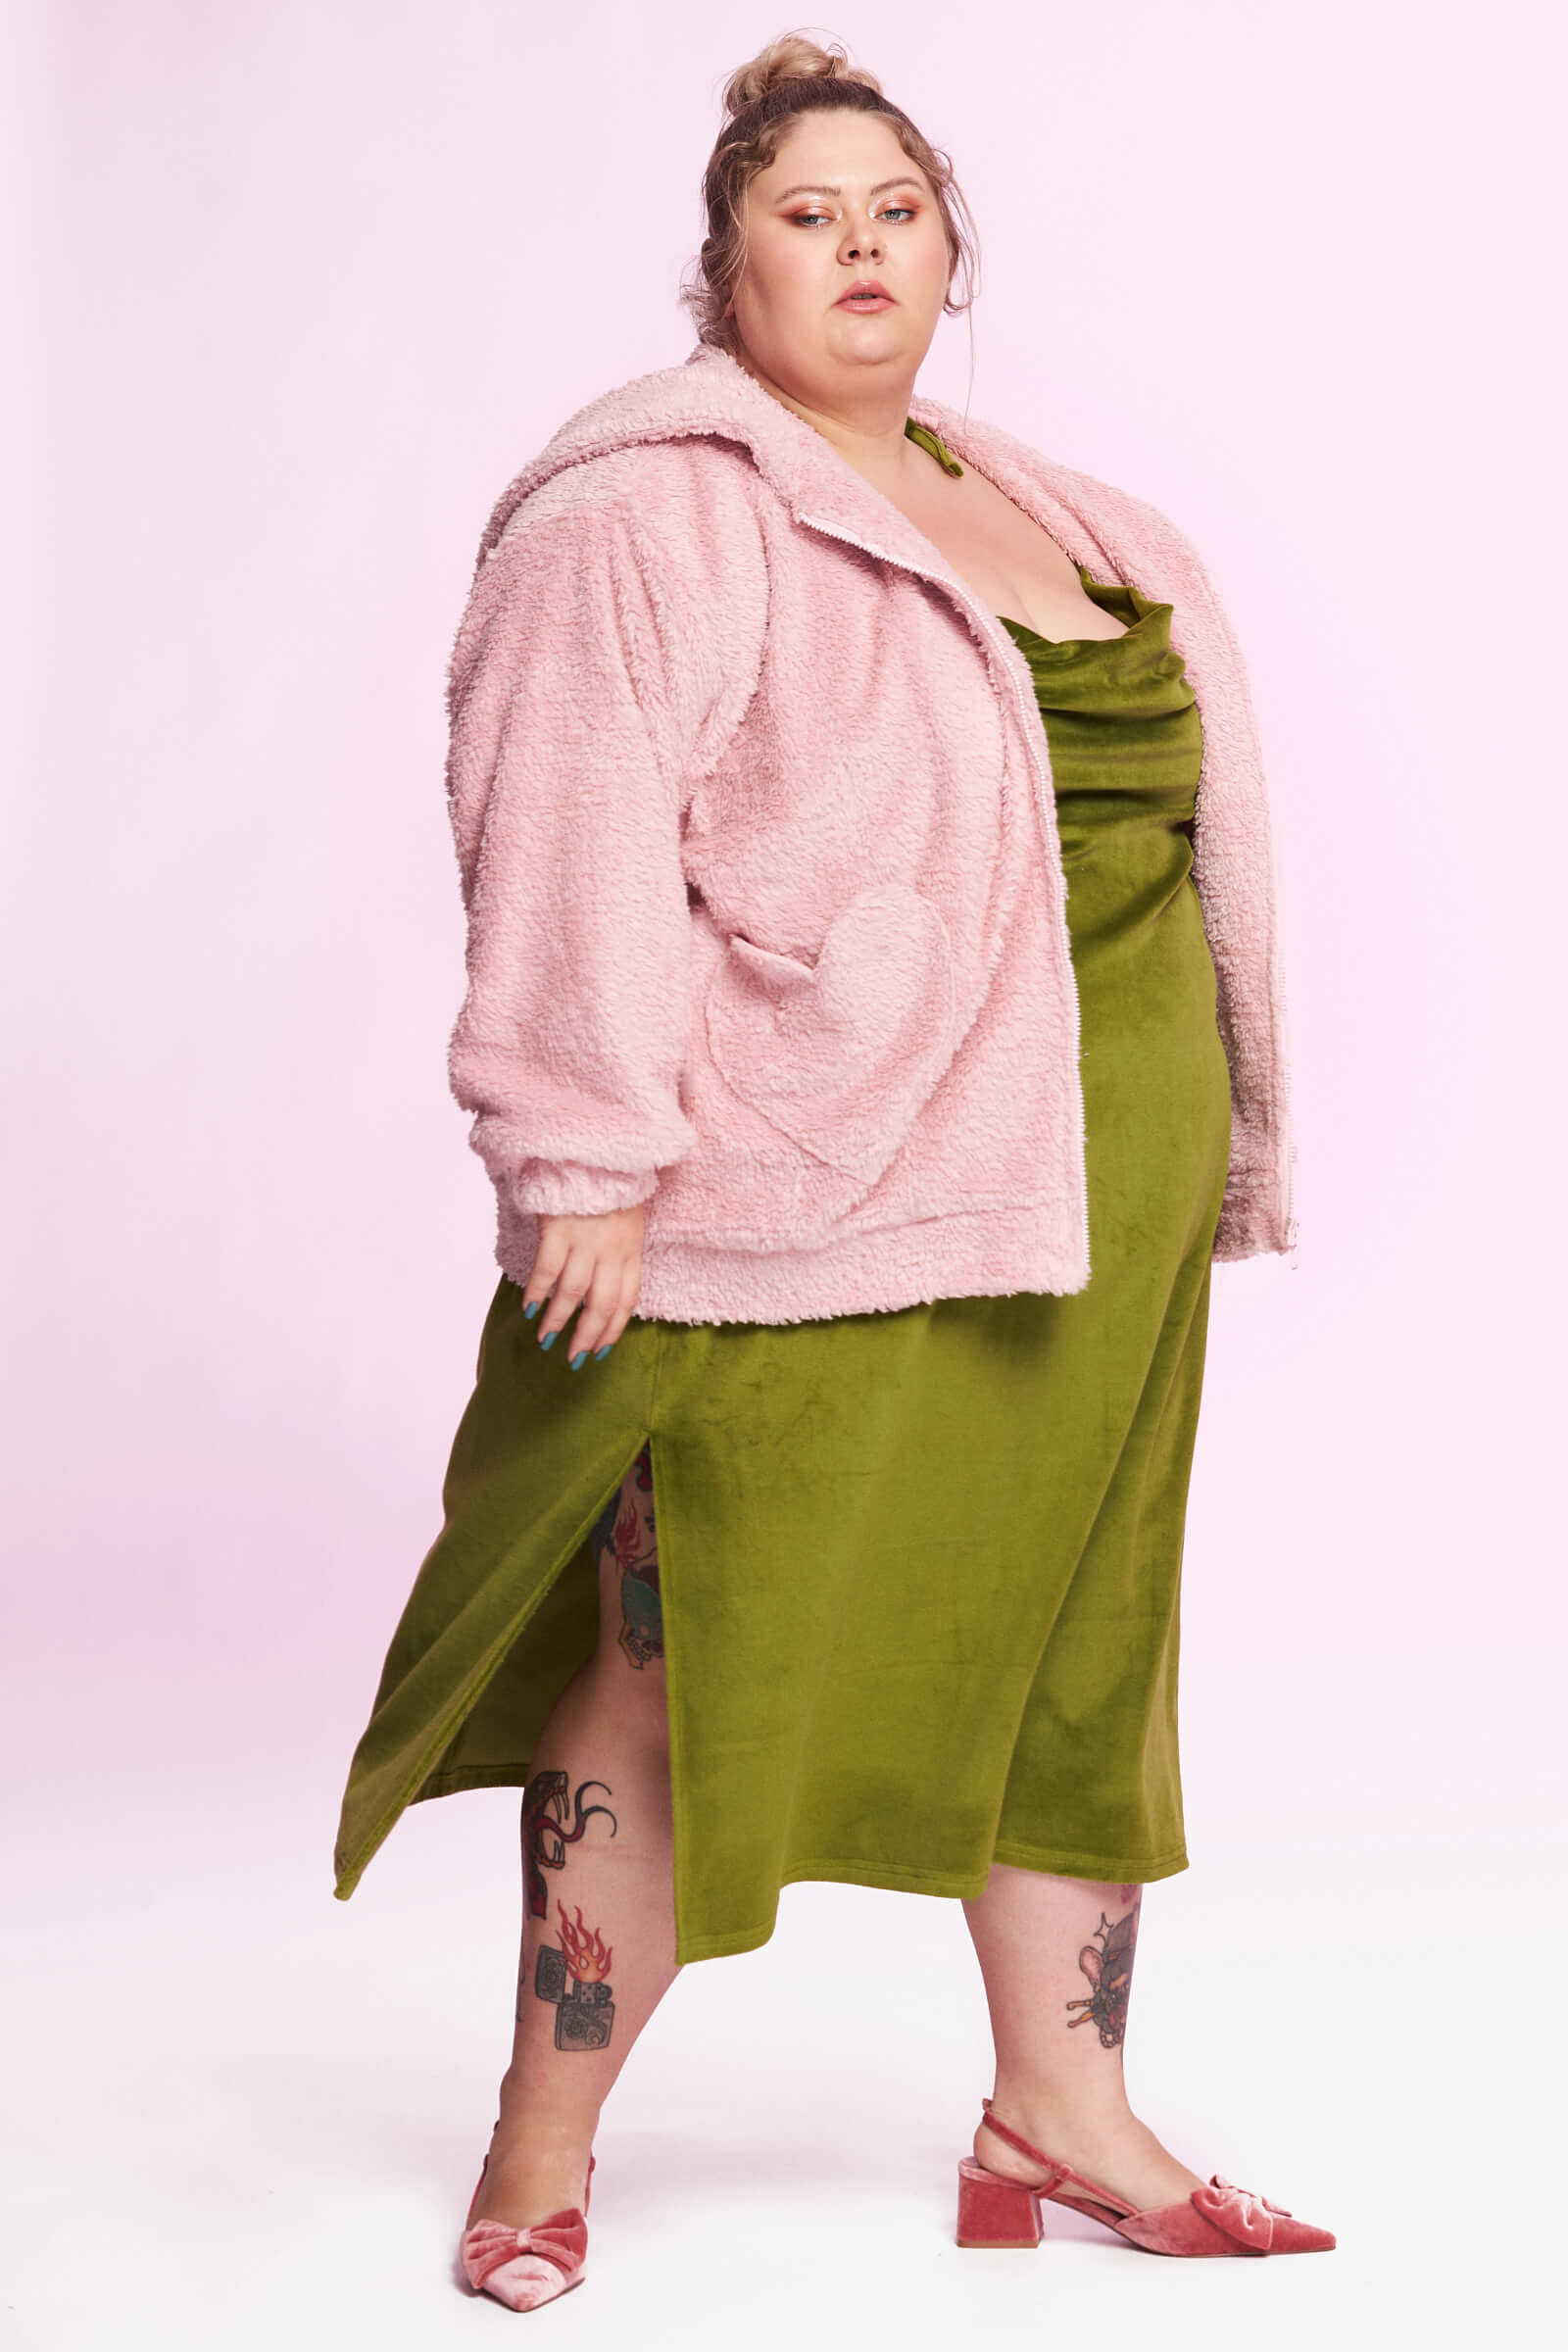 A plus size model in an acid green silk dress with pink fuzzy jacket.